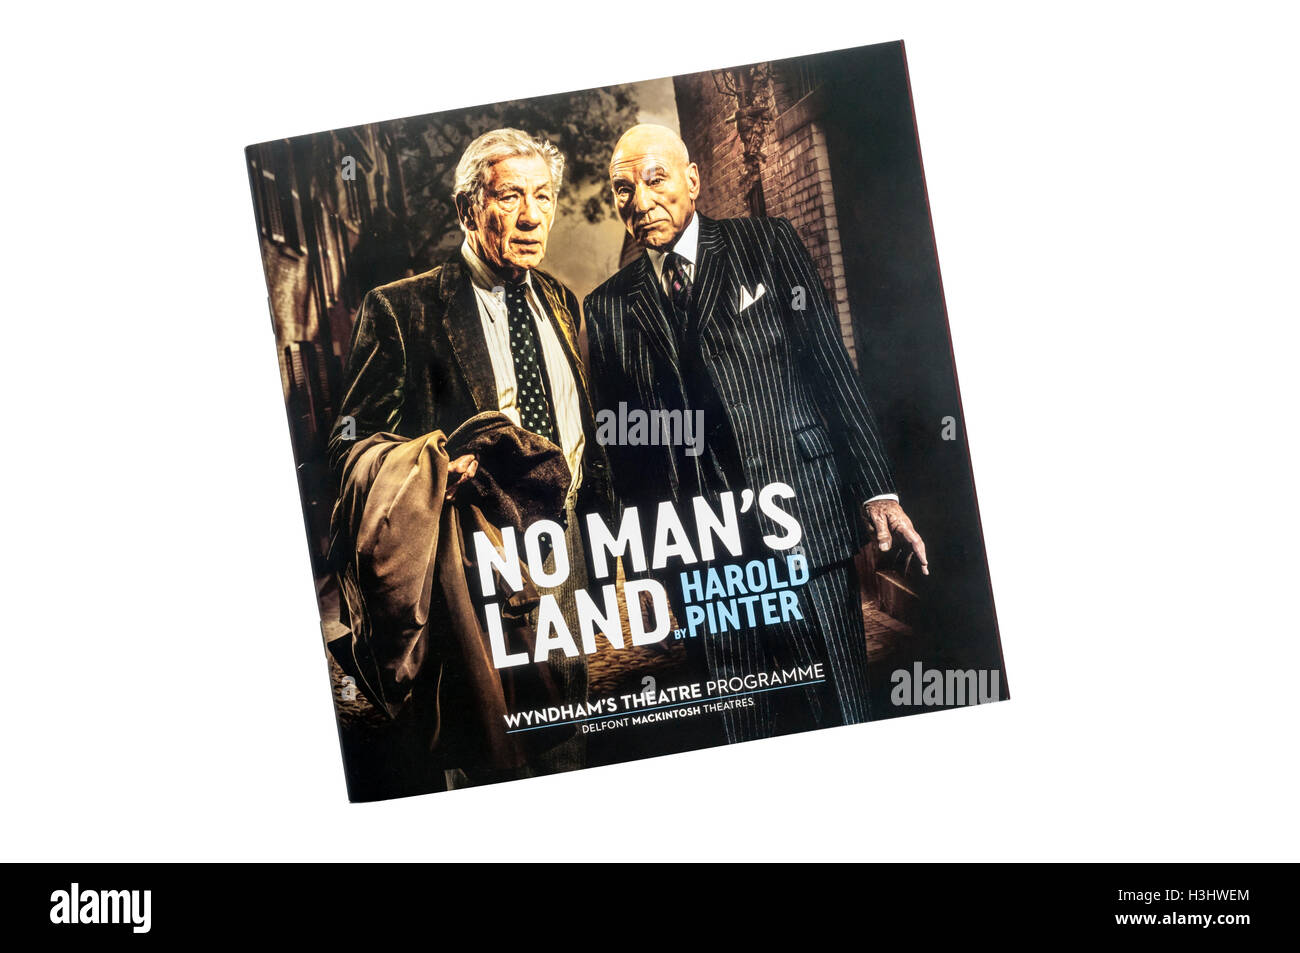 Programme for 2016 production of No Man's Land by Harold Pinter at Wyndham's Theatre. Stock Photo